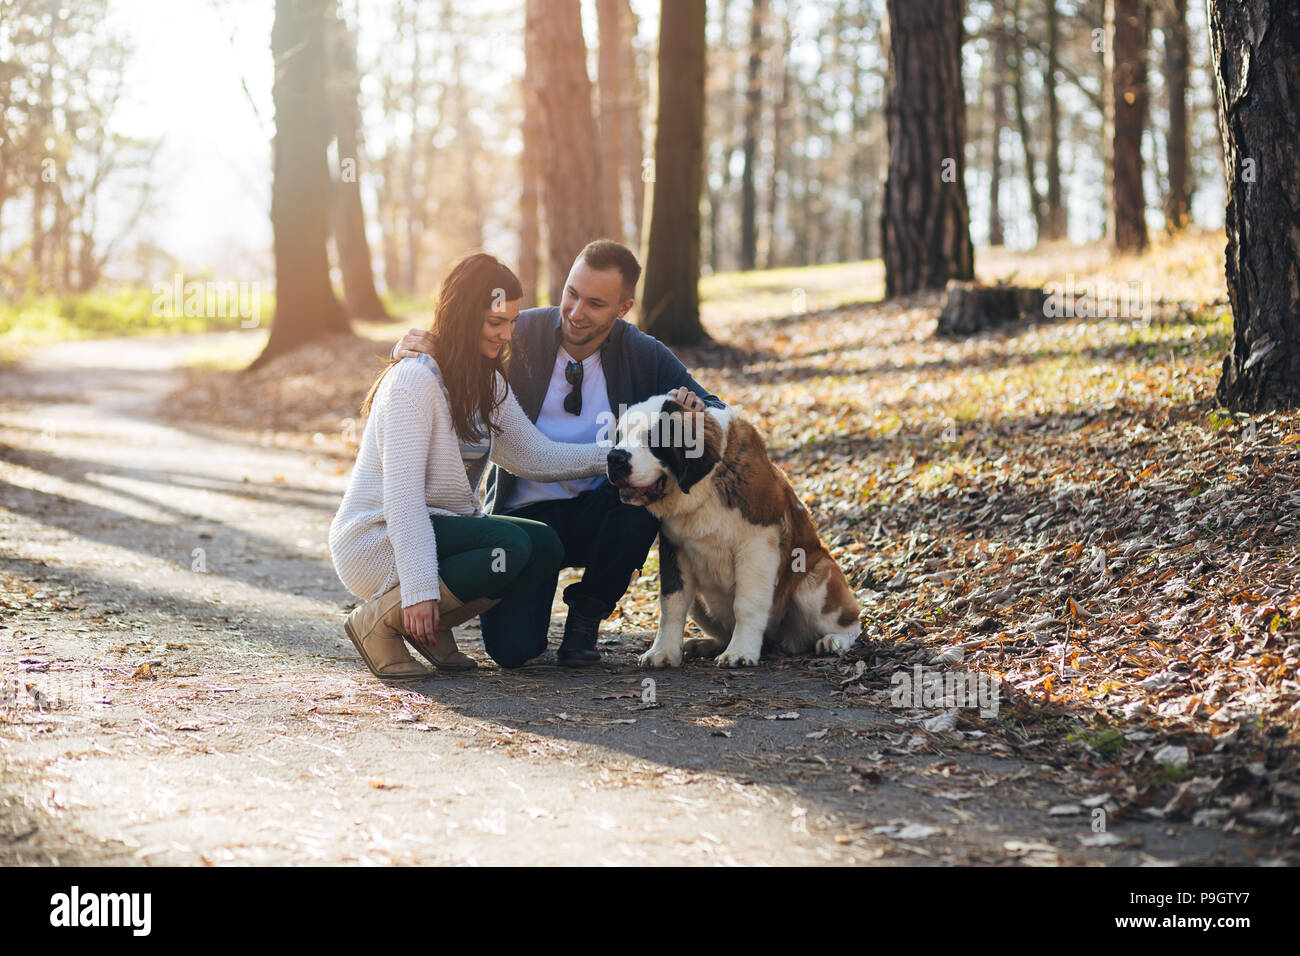 Young couple enjoying nature outdoors together with their Saint Bernard puppy. Stock Photo